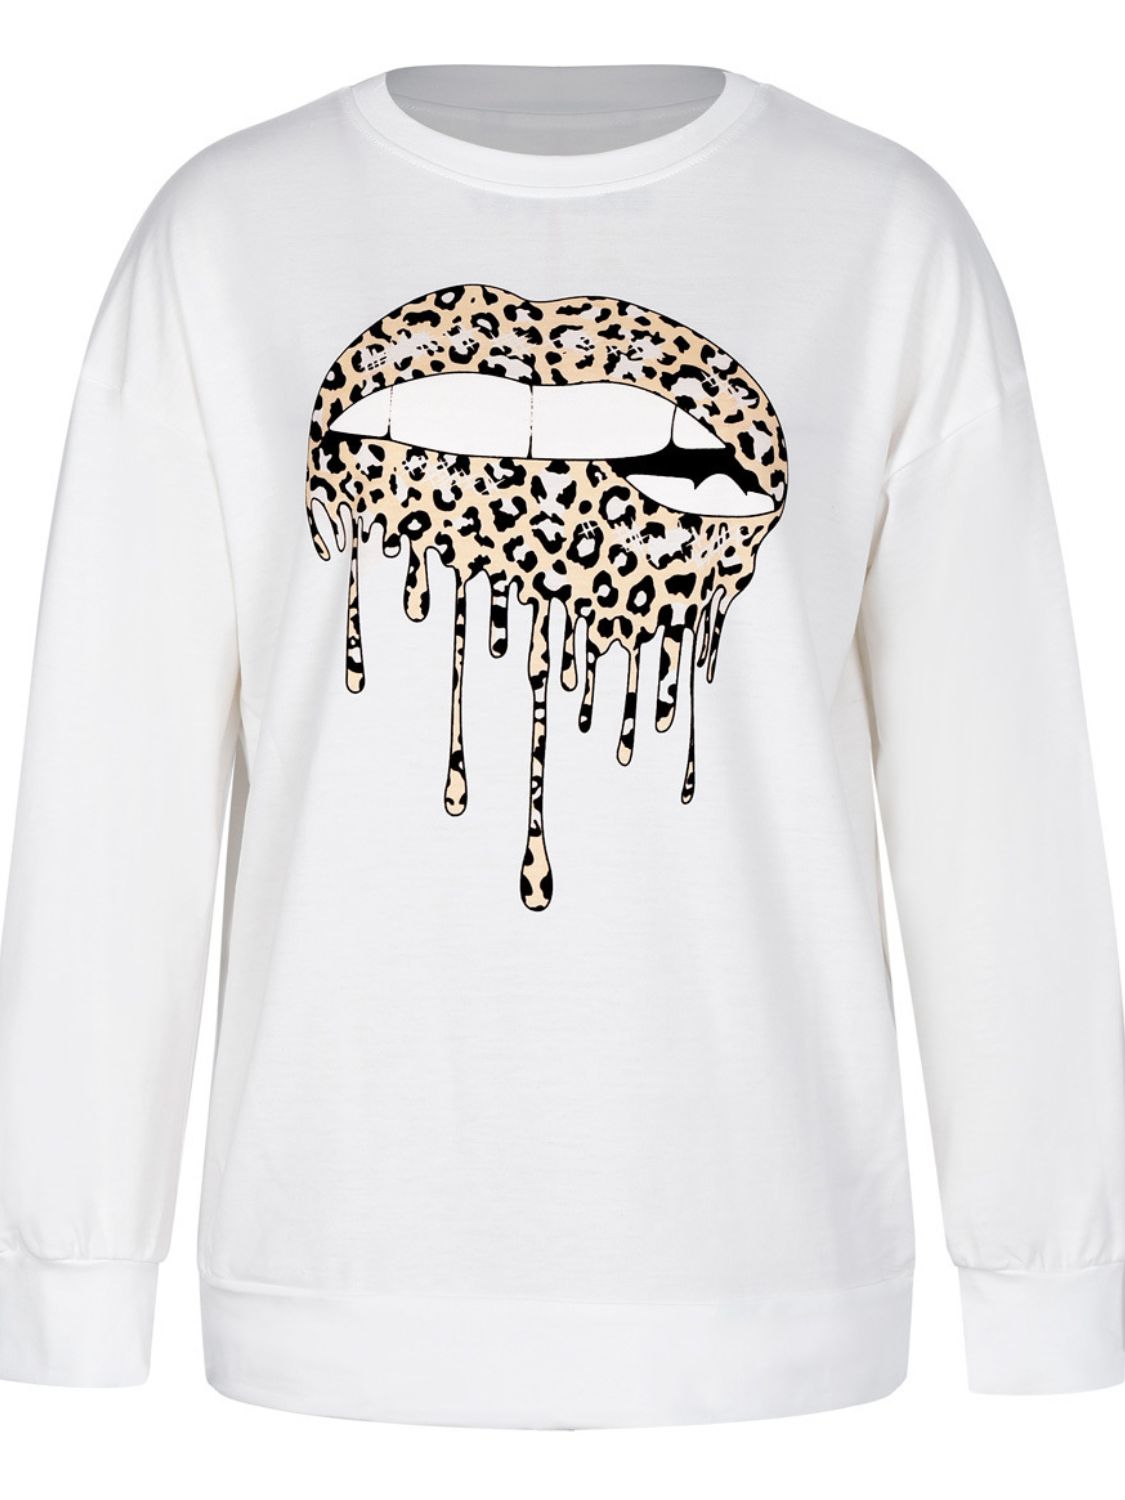 Graphic Dropped Shoulder Round Neck Sweatshirt The Stout Steer